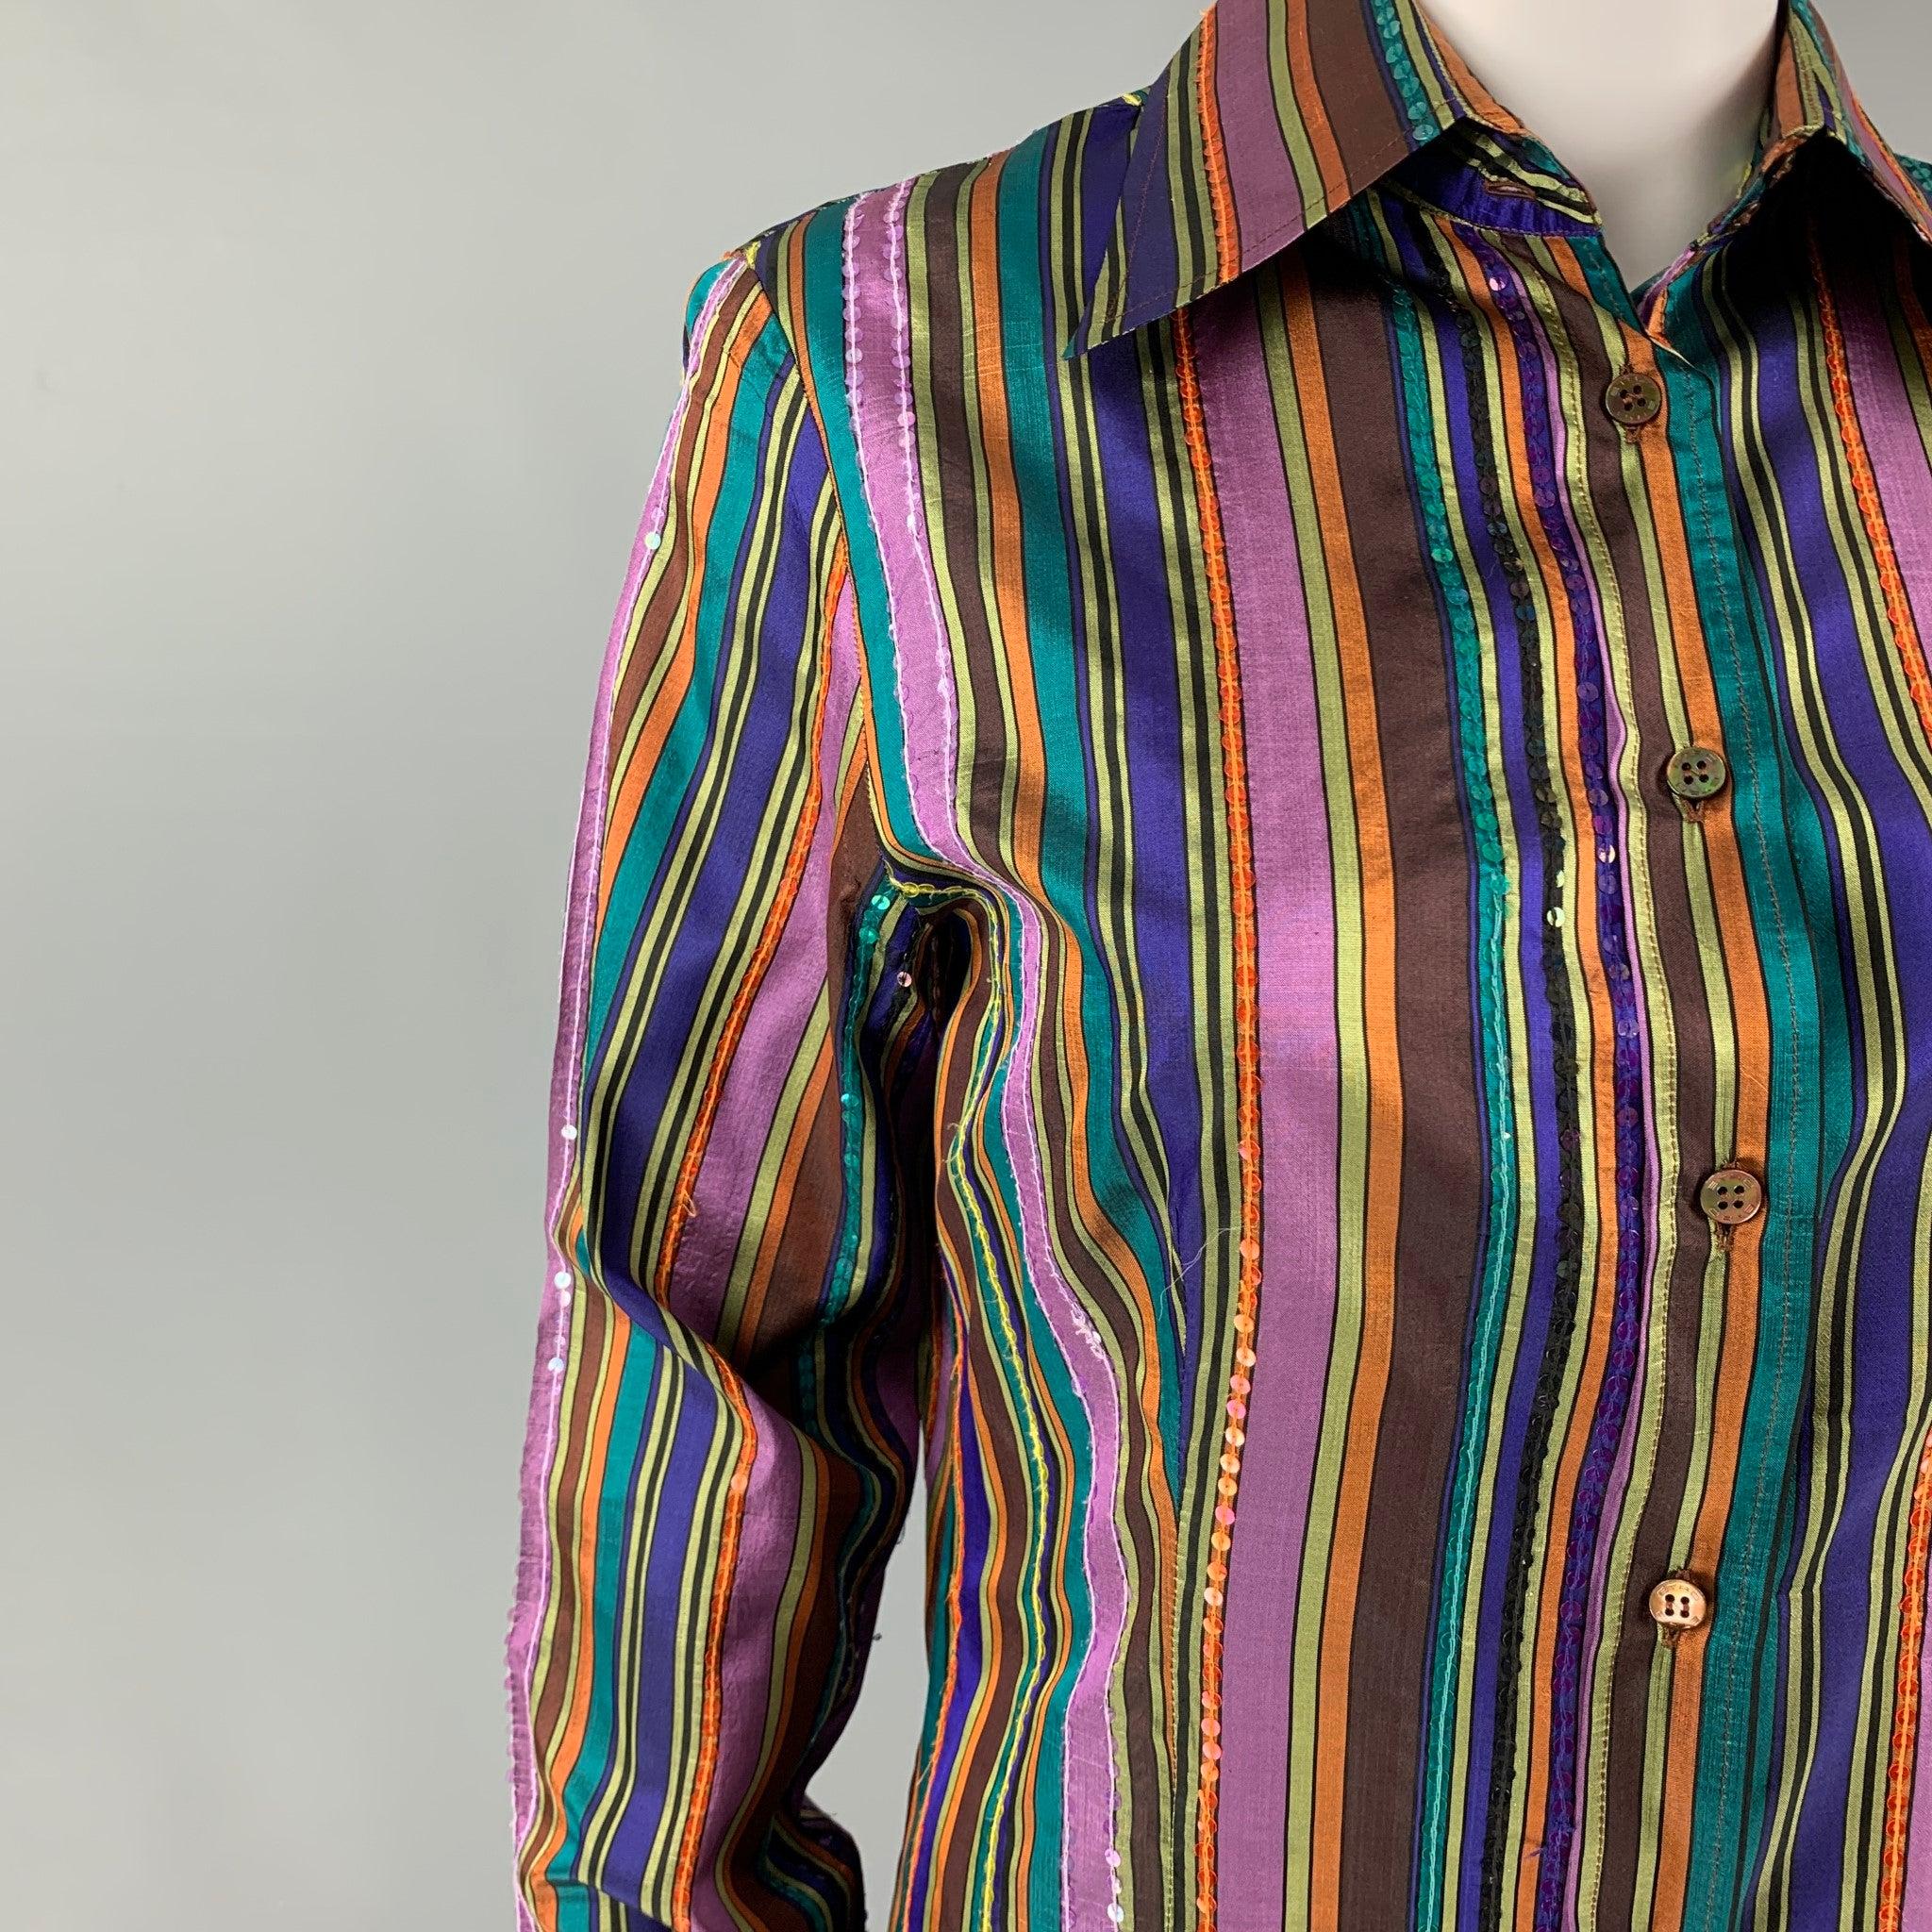 ETRO blouse comes in a multi-color stripe silk featuring a pointed collar, sequined details, and a button up closure. Made in Italy.
Very Good
Pre-Owned Condition. 

Marked:  44 

Measurements: 
 
Shoulder: 16 inches Bust: 34 inches Sleeve: 25